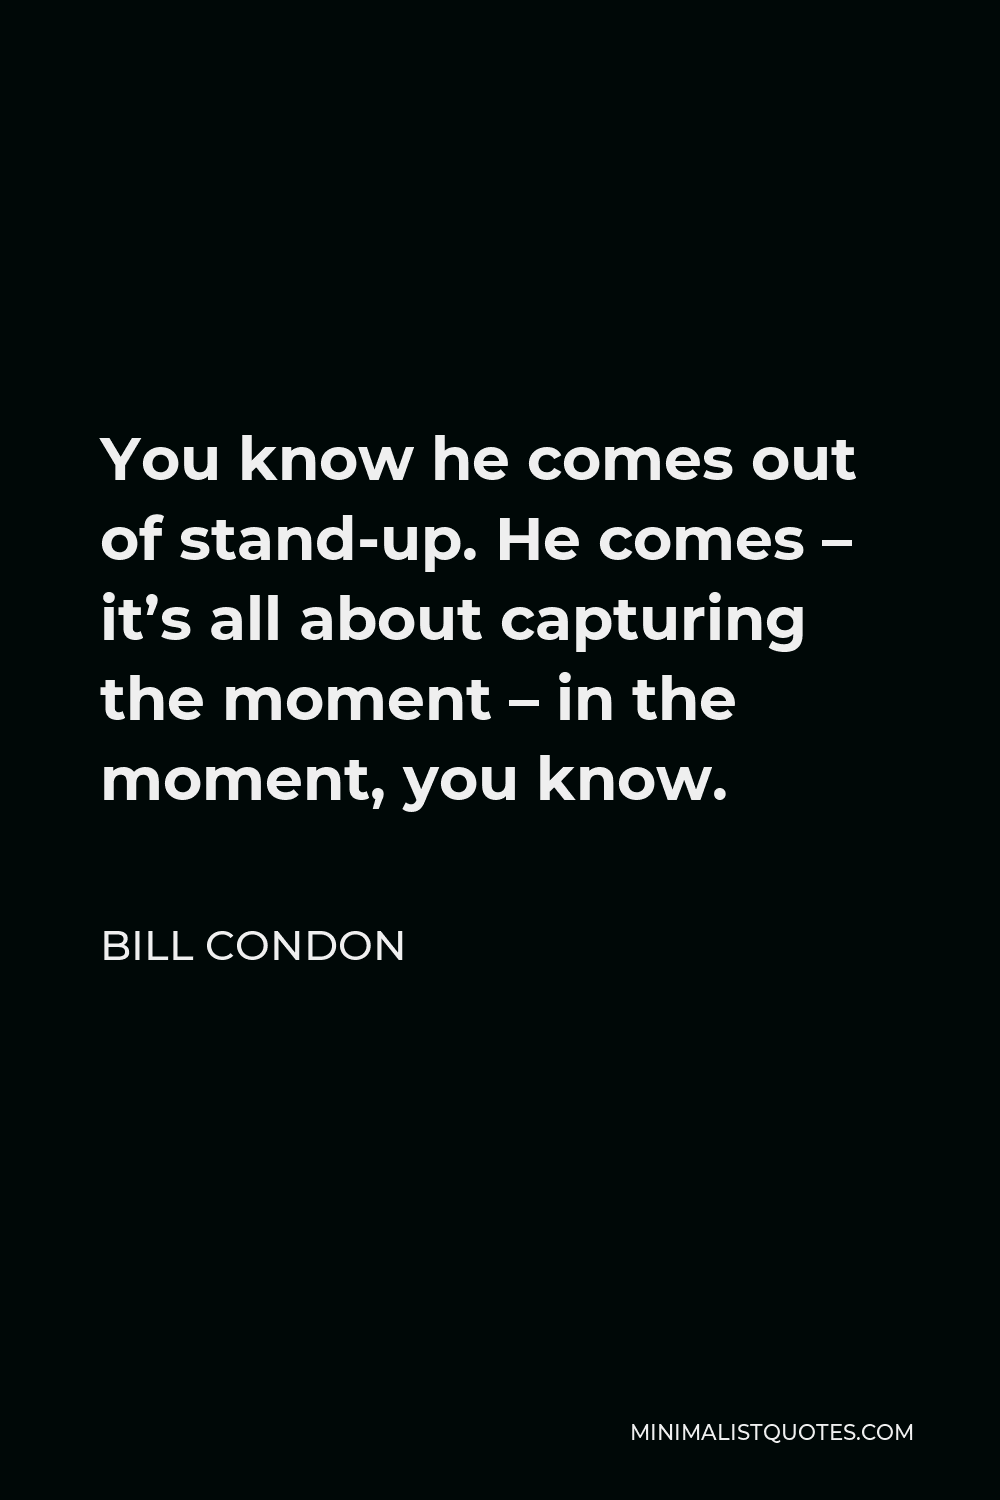 Bill Condon Quote - You know he comes out of stand-up. He comes – it’s all about capturing the moment – in the moment, you know.